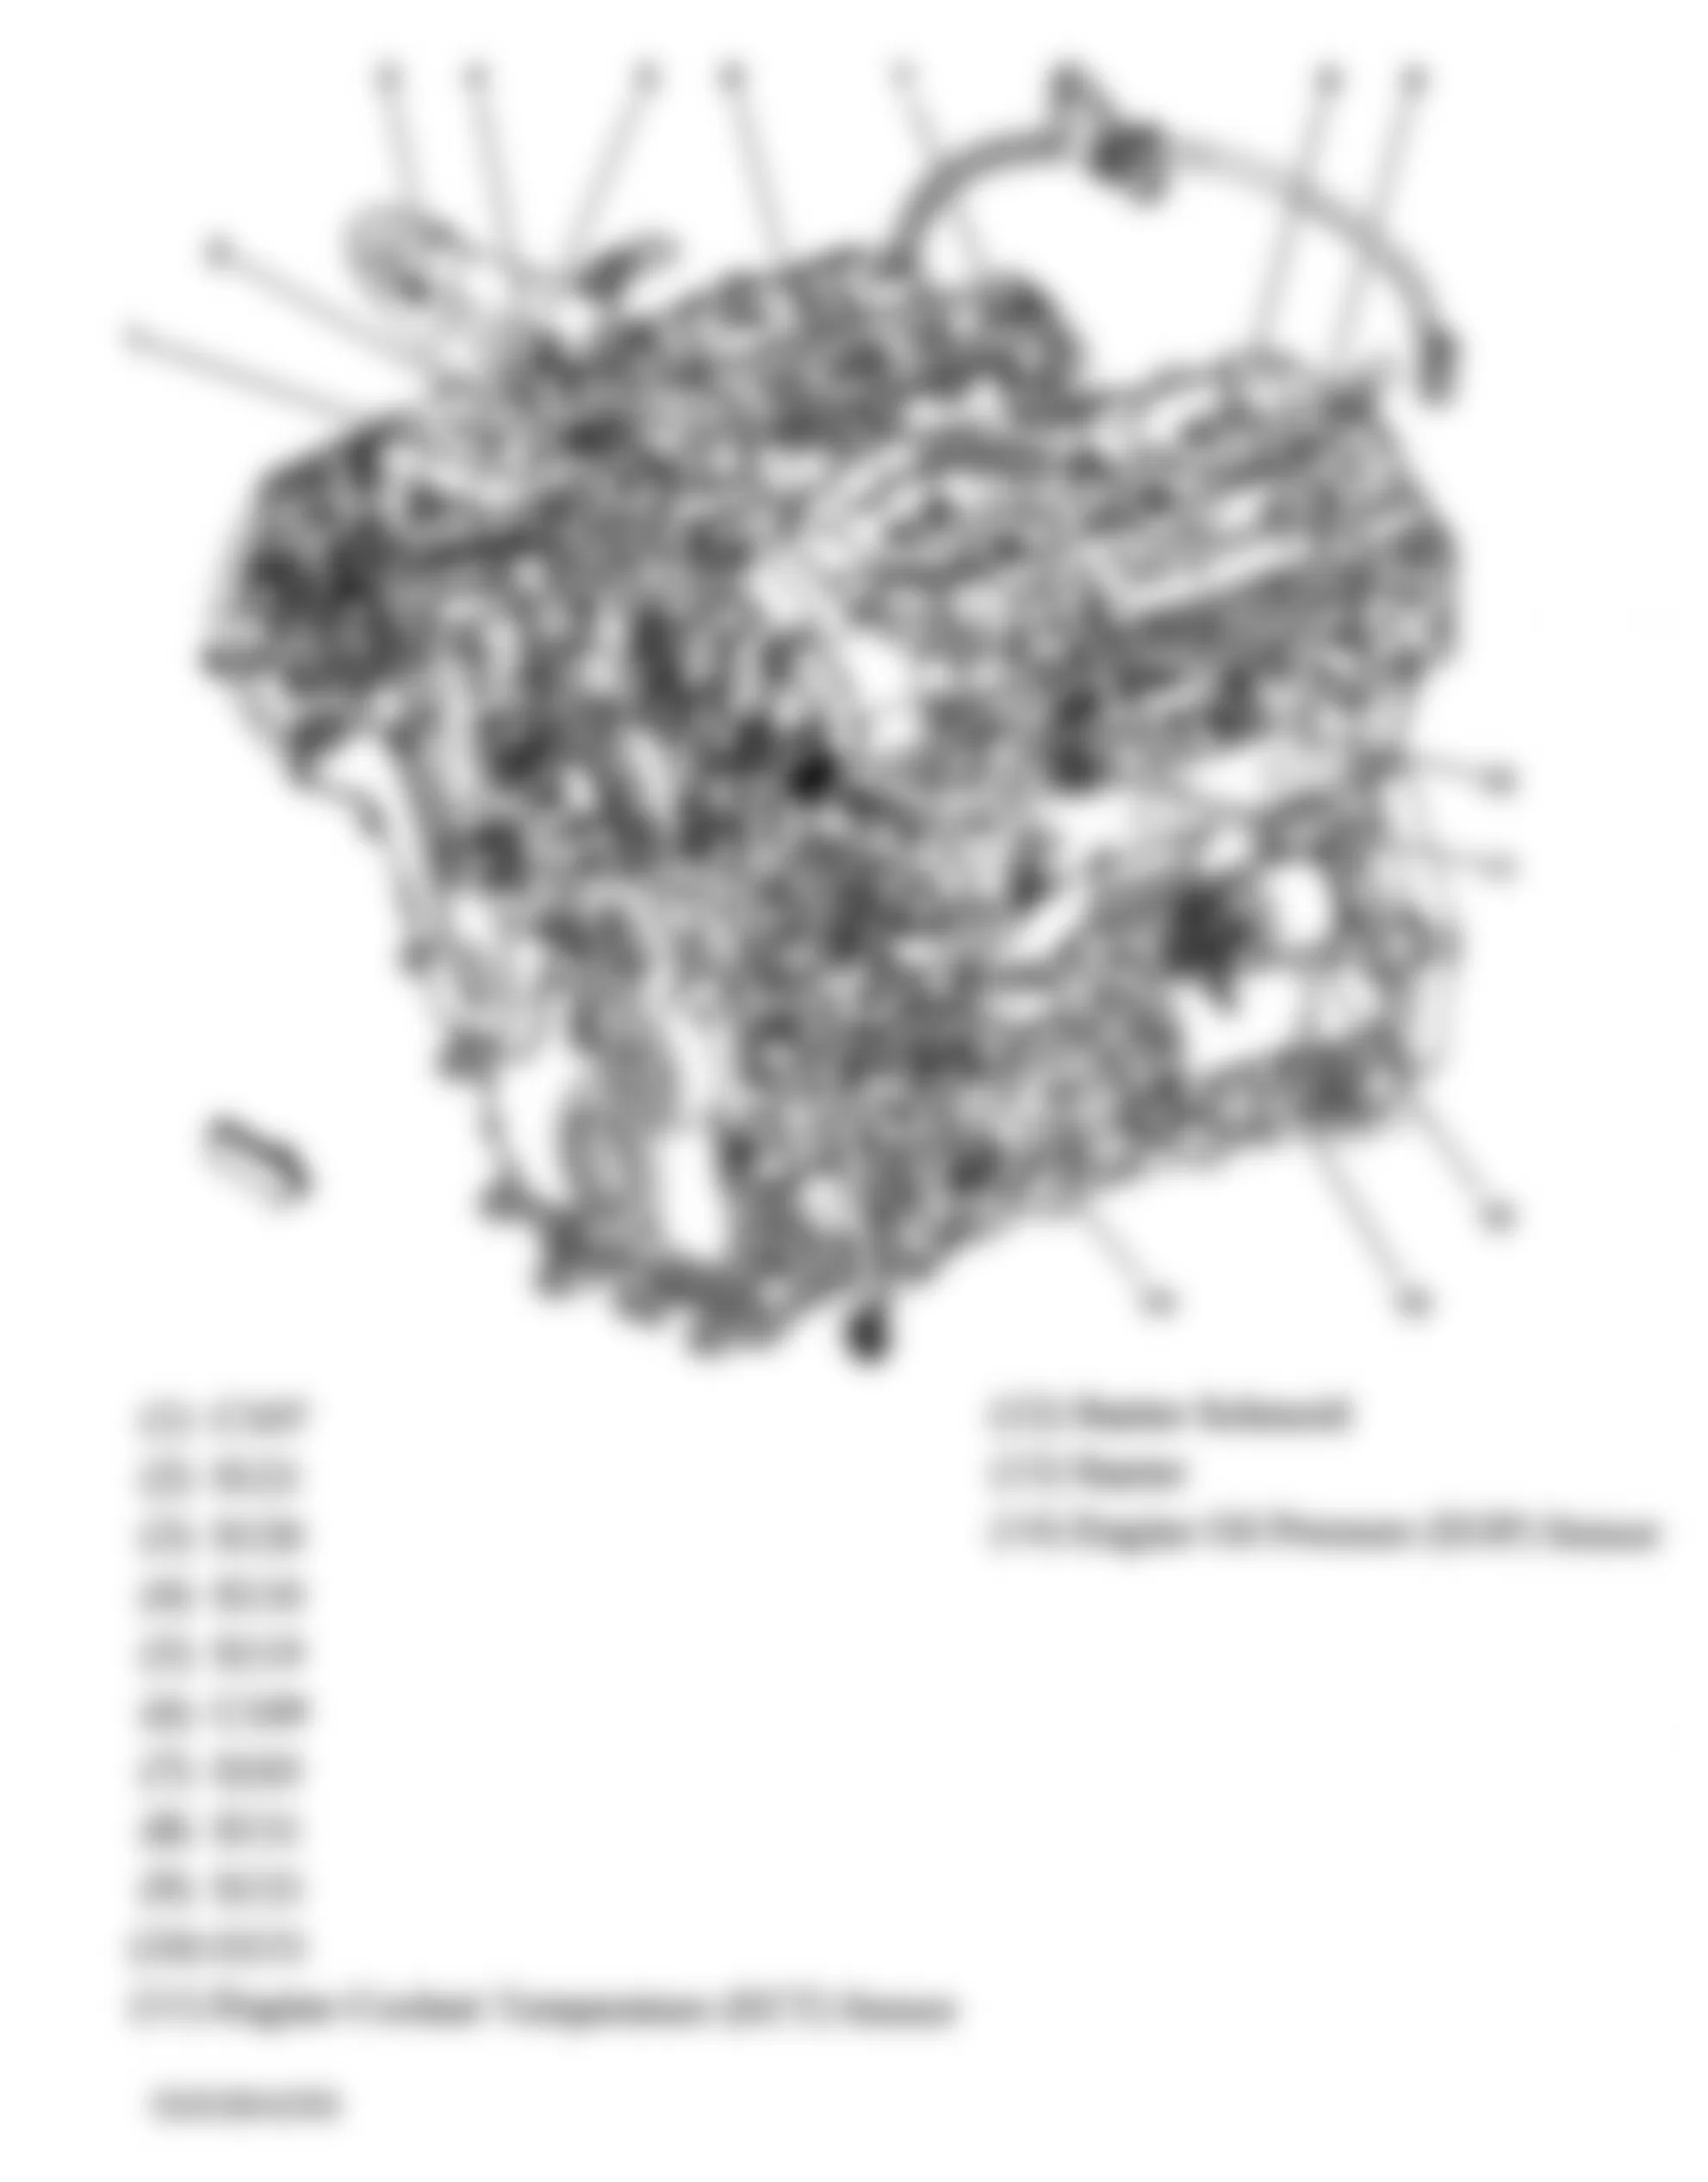 Buick Allure CX 2005 - Component Locations -  Front Of Engine (3.6L)